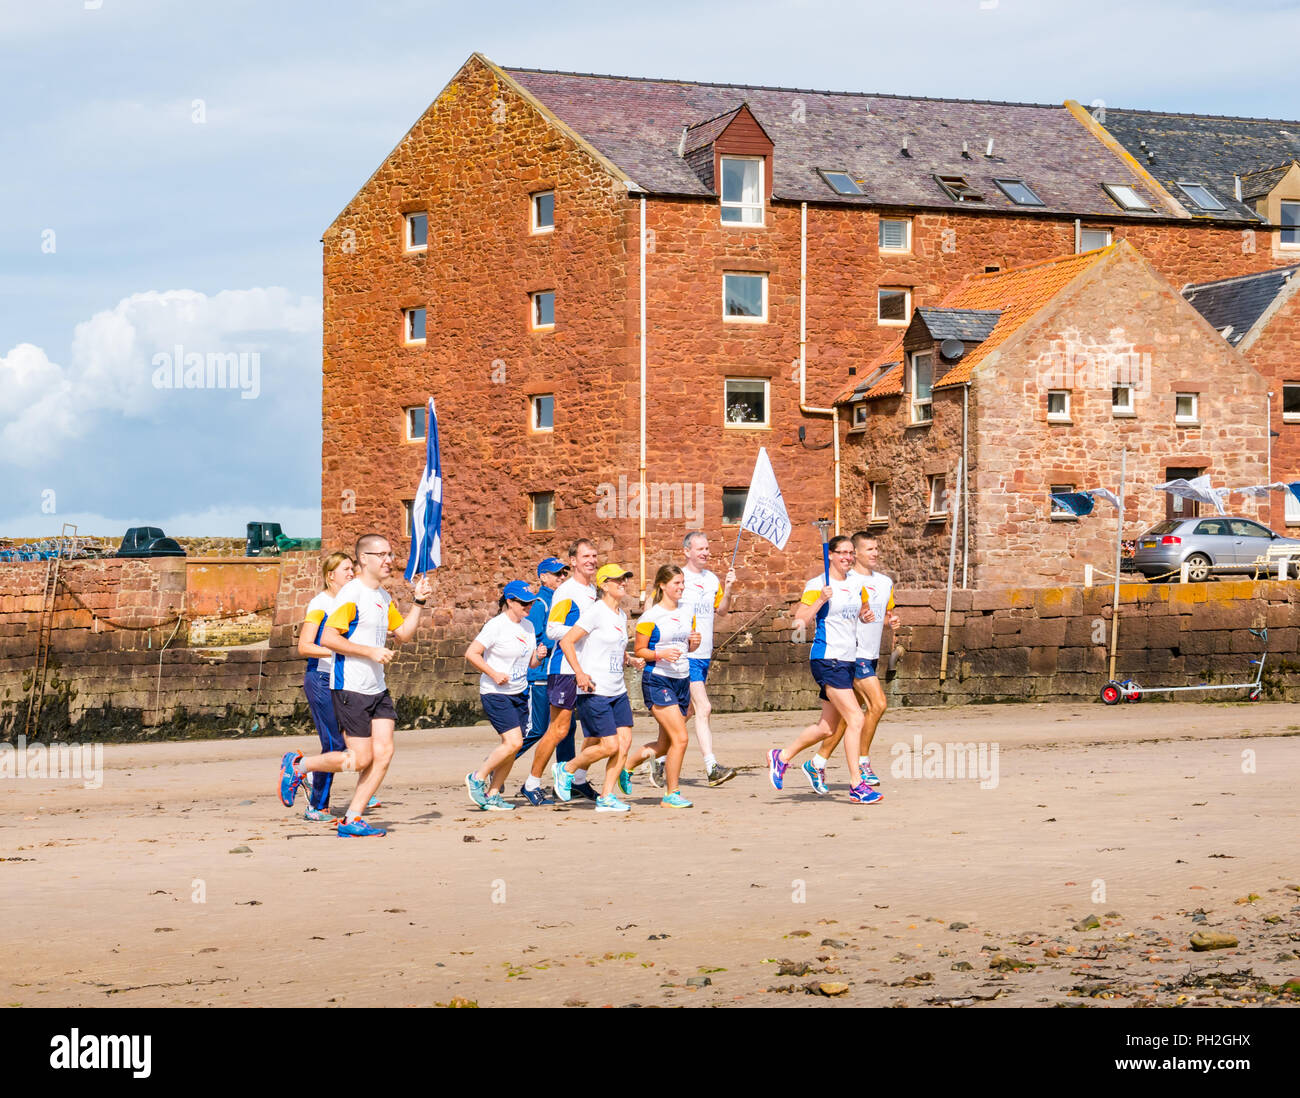 West Bay, North Berwick, East Lothian, Scotland, UK, 30th August 2018. Sir Chinmoy Oneness-Home Peace run runners set off in the sunshine from North Berwick West Bay beach to run along the coastline to Dirleton carrying a flaming peace torch and a saltire and peace flag. The flags and torch are carried by a team of international runners through the United Kingdom over 16 days starting from today. The Peace Run is a global torch relay promoting world peace Stock Photo